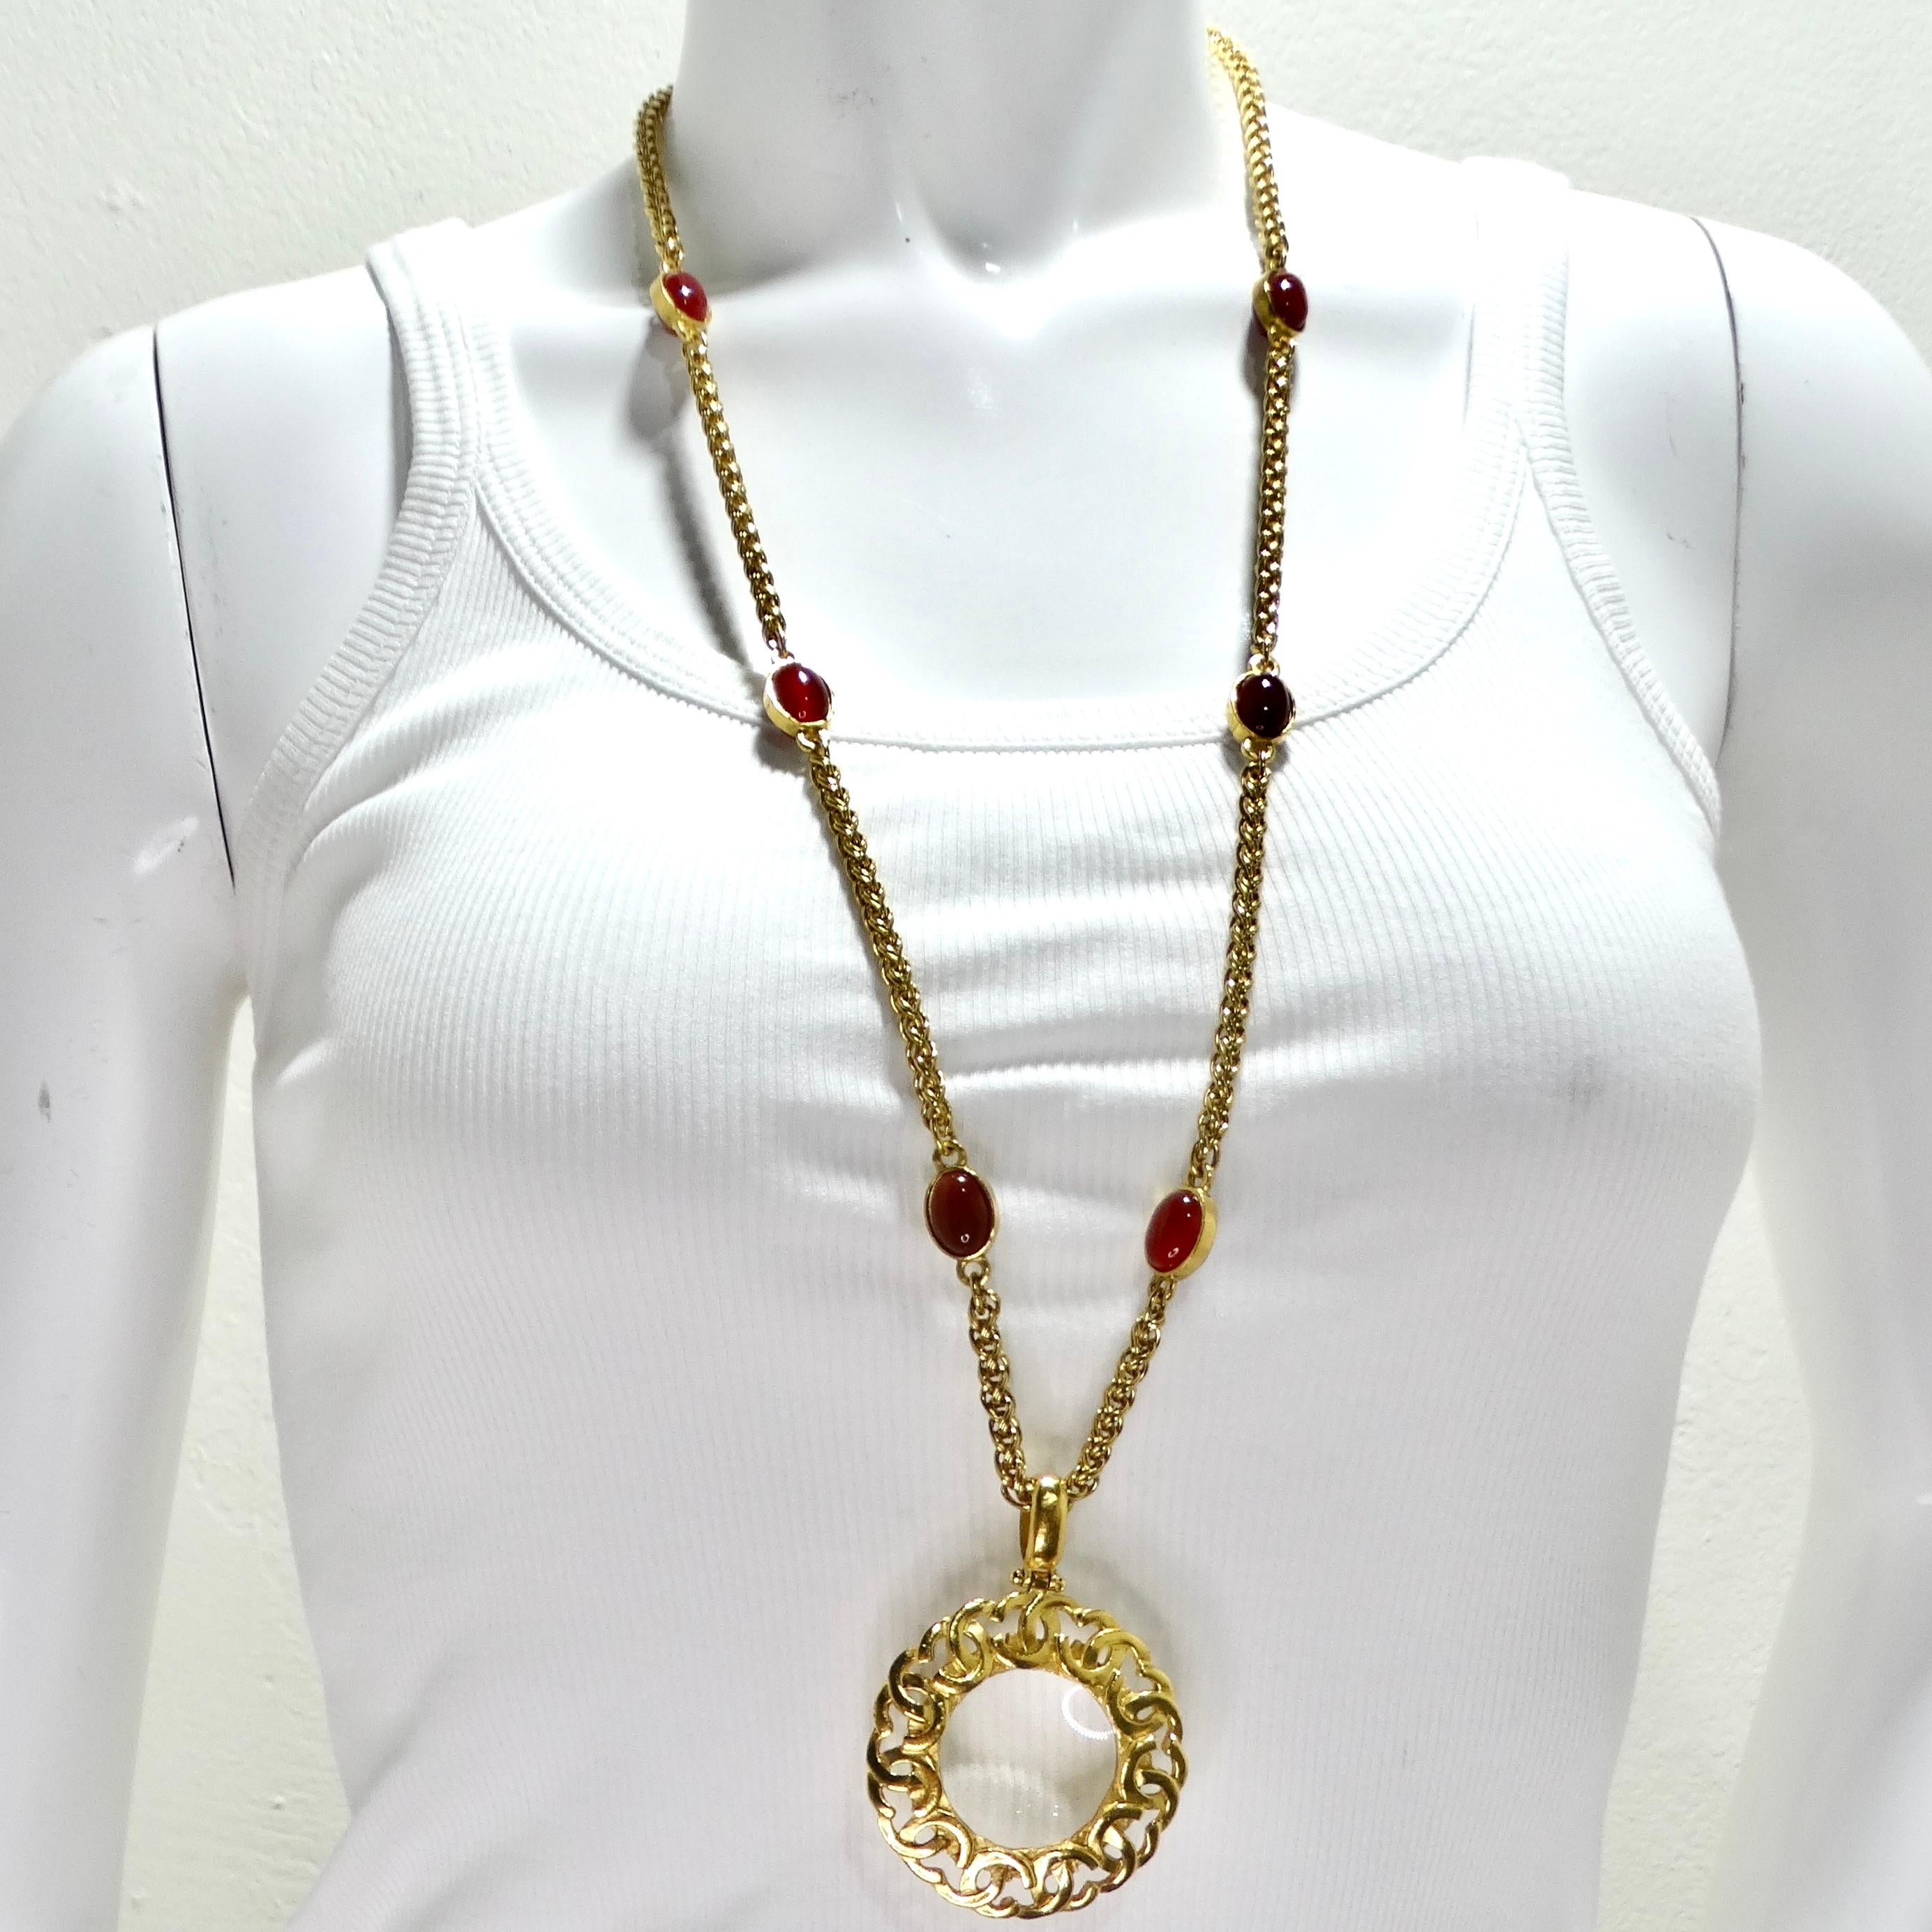 Indulge in the timeless elegance of Chanel with this exquisite Chanel 1995 Gold Tone Gripoix Glass Pendant Necklace. This rare vintage piece is a true treasure, showcasing the iconic craftsmanship and sophistication that Chanel is renowned